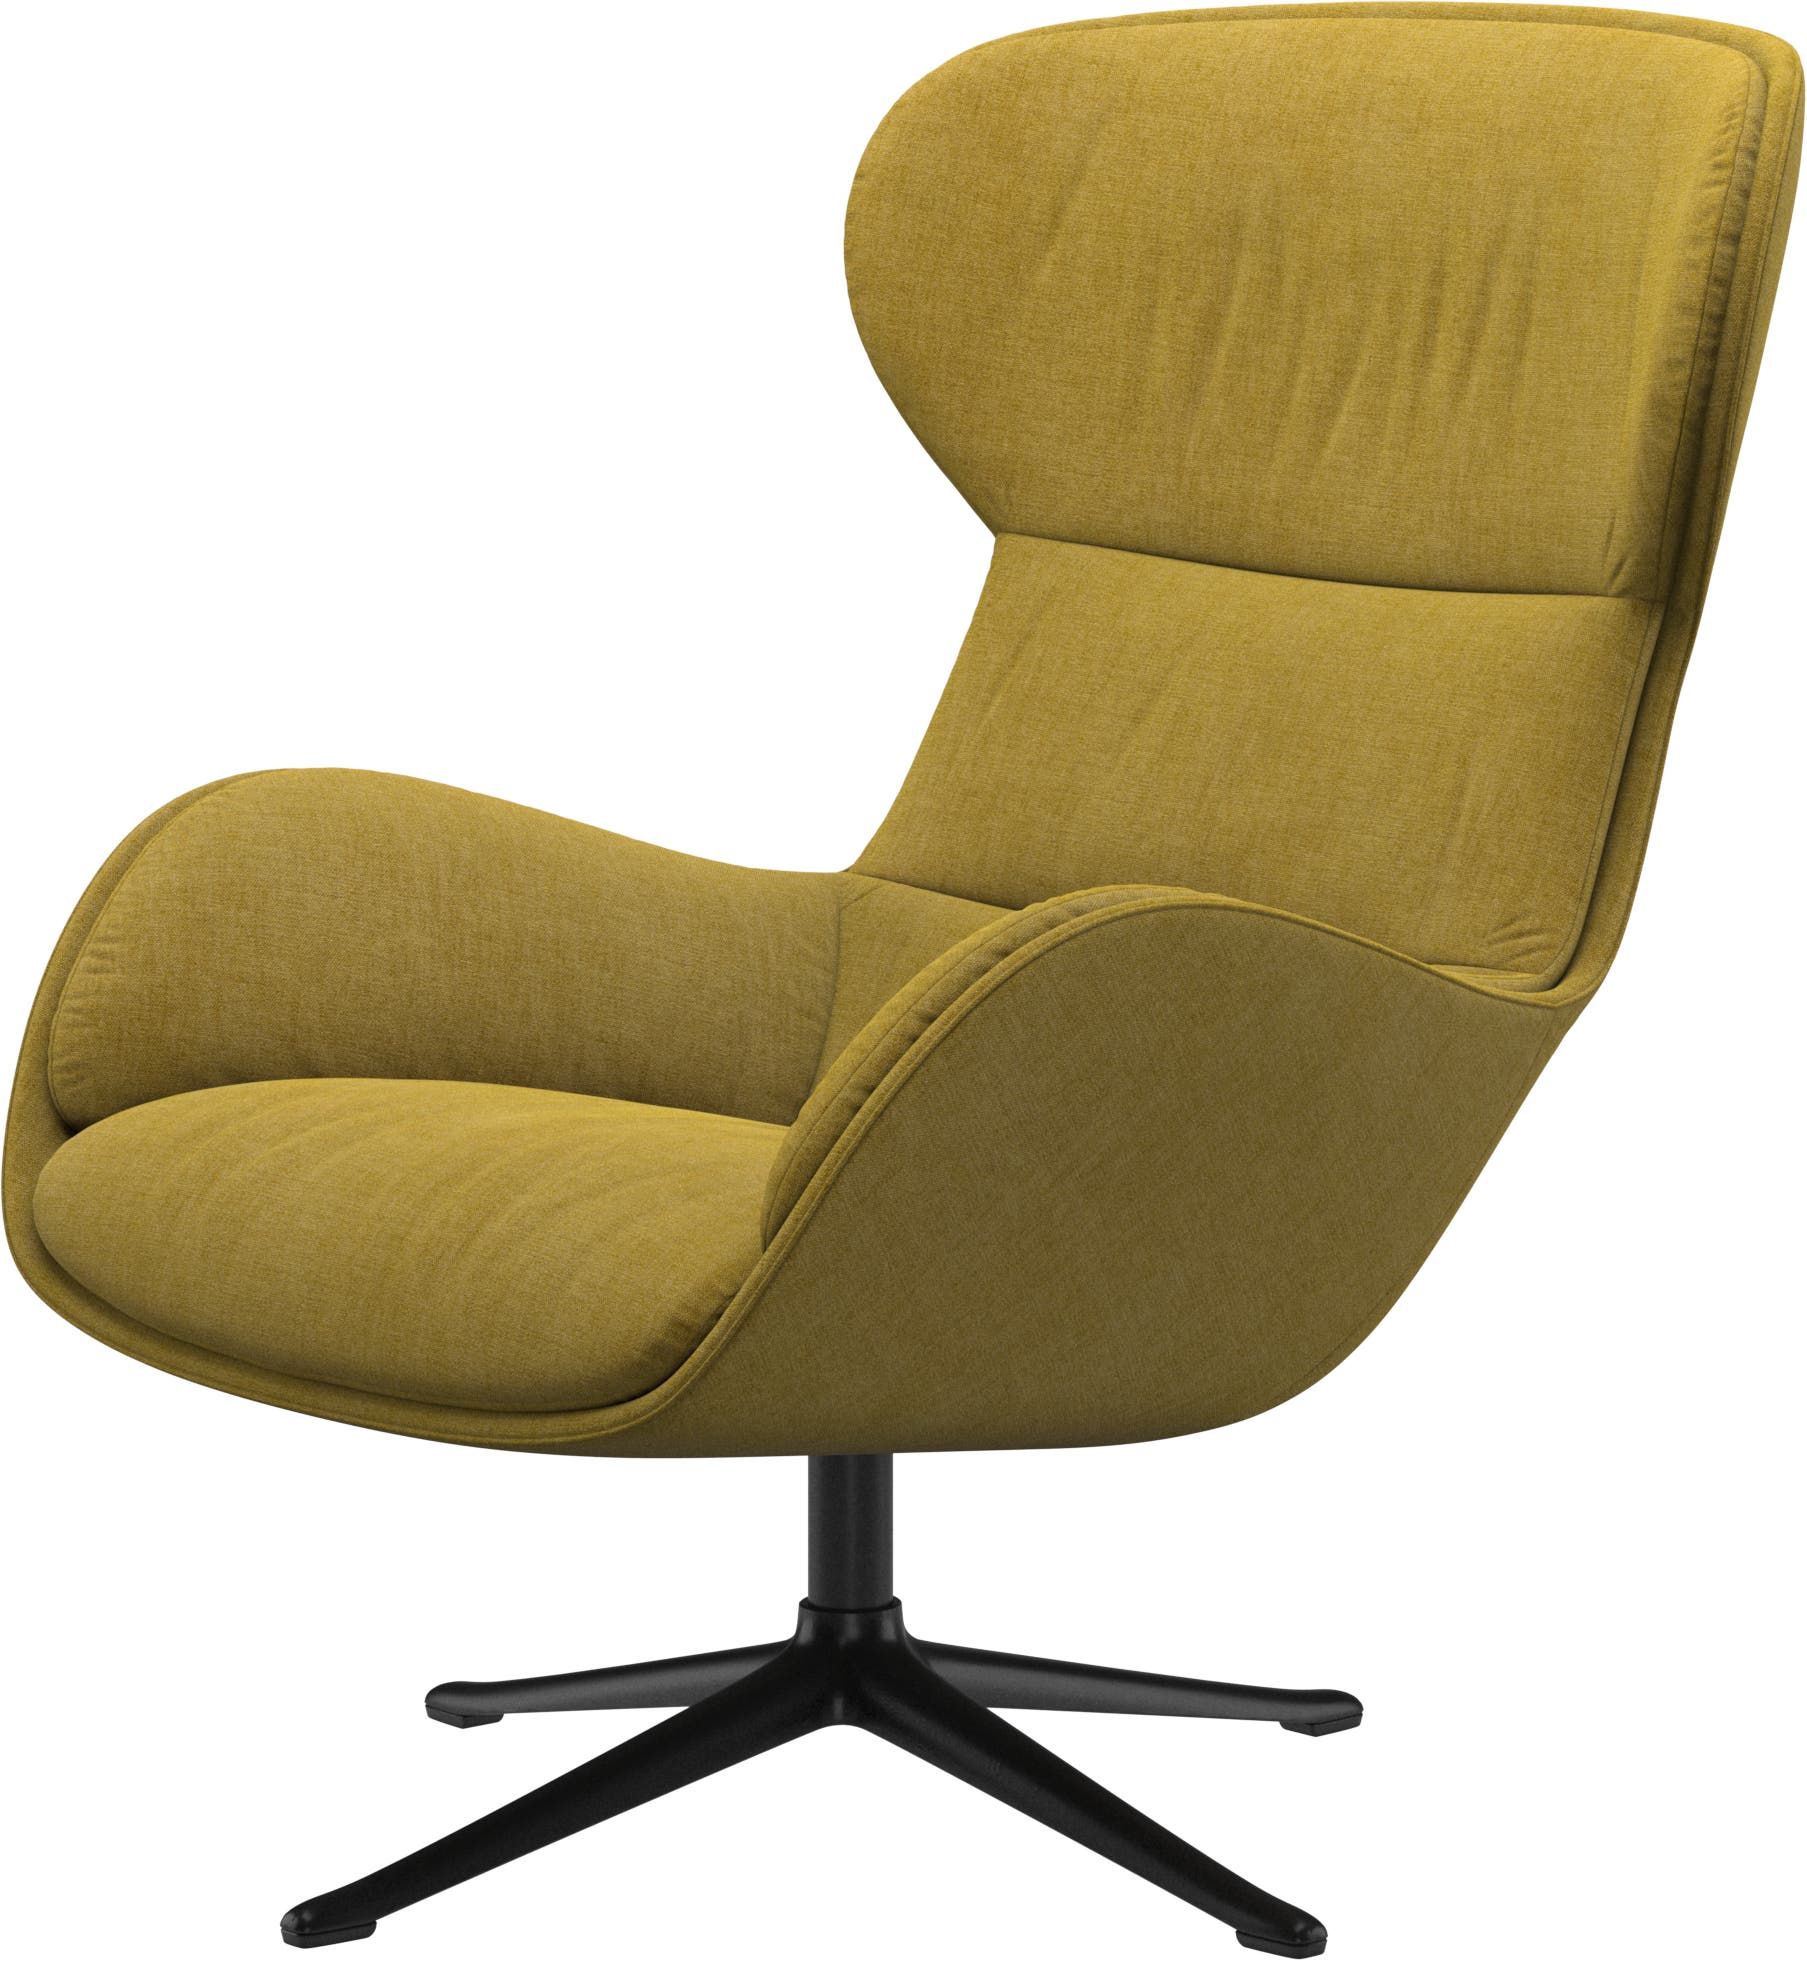 Reno chair with swivel function